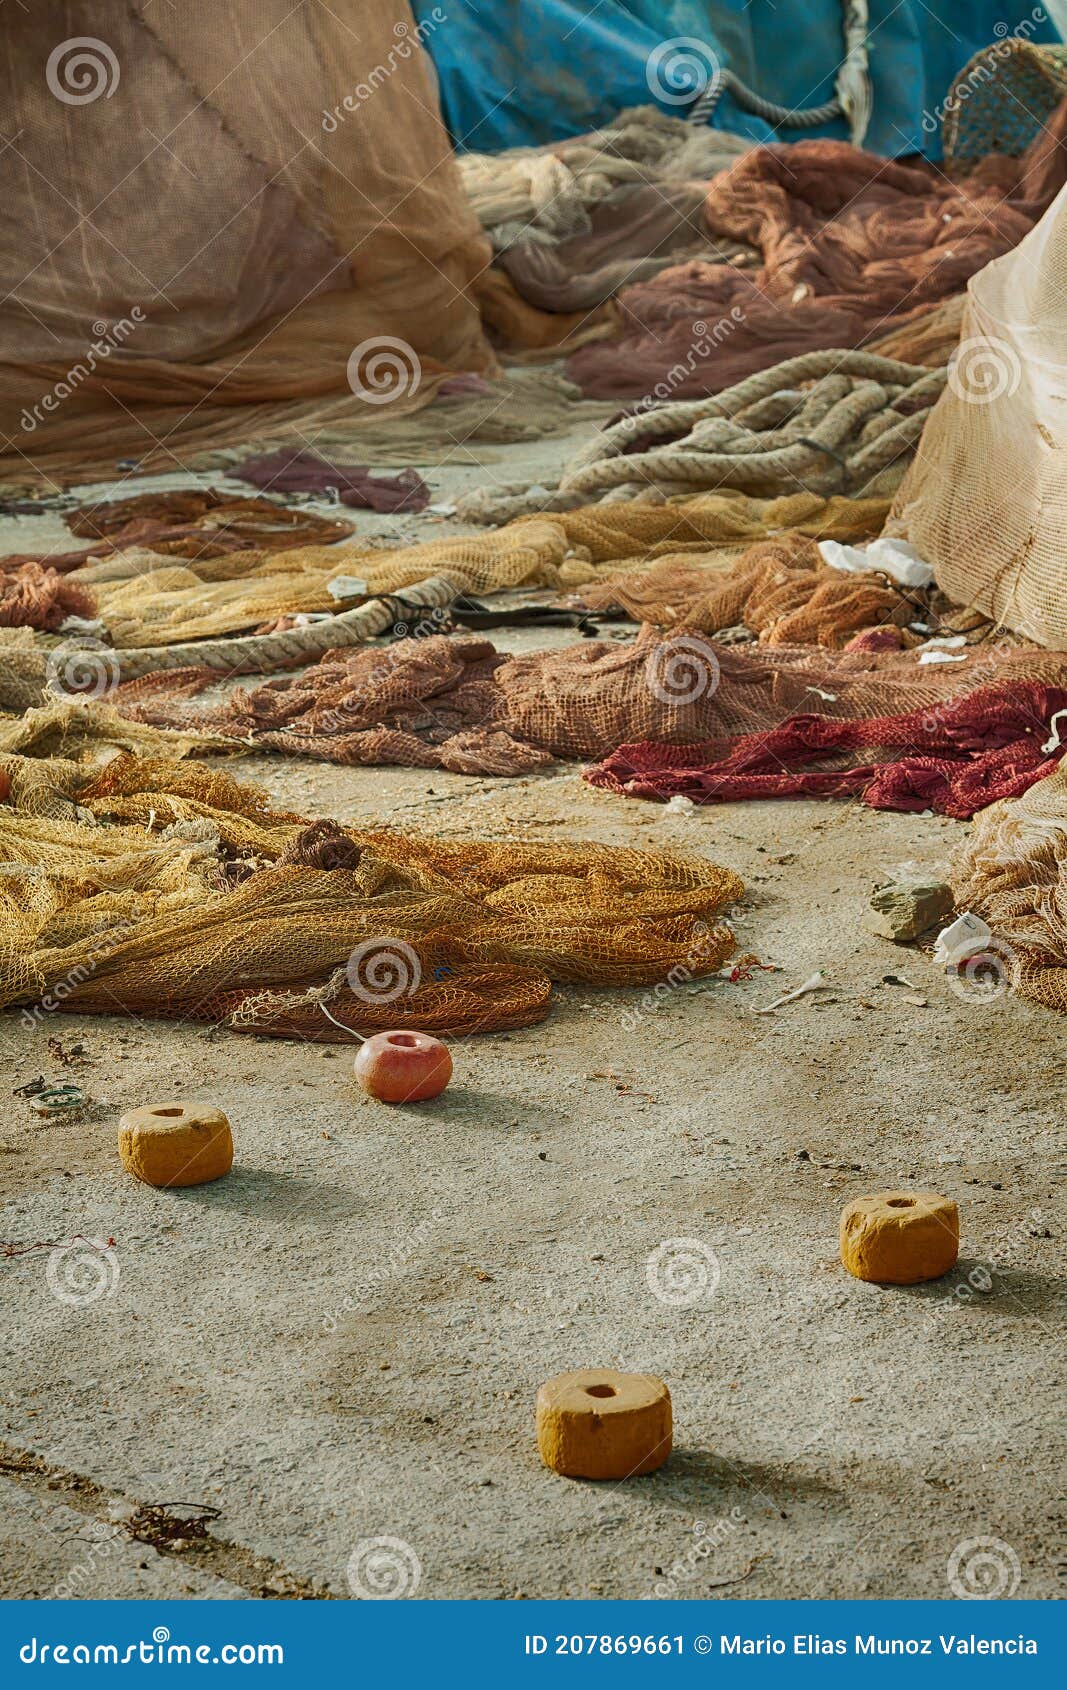 Closeup of a Pile of Fishing Nets with a White Rope and Red and White Cork  Floats in a Fishing Port Stock Image - Image of industrial, background:  207869661